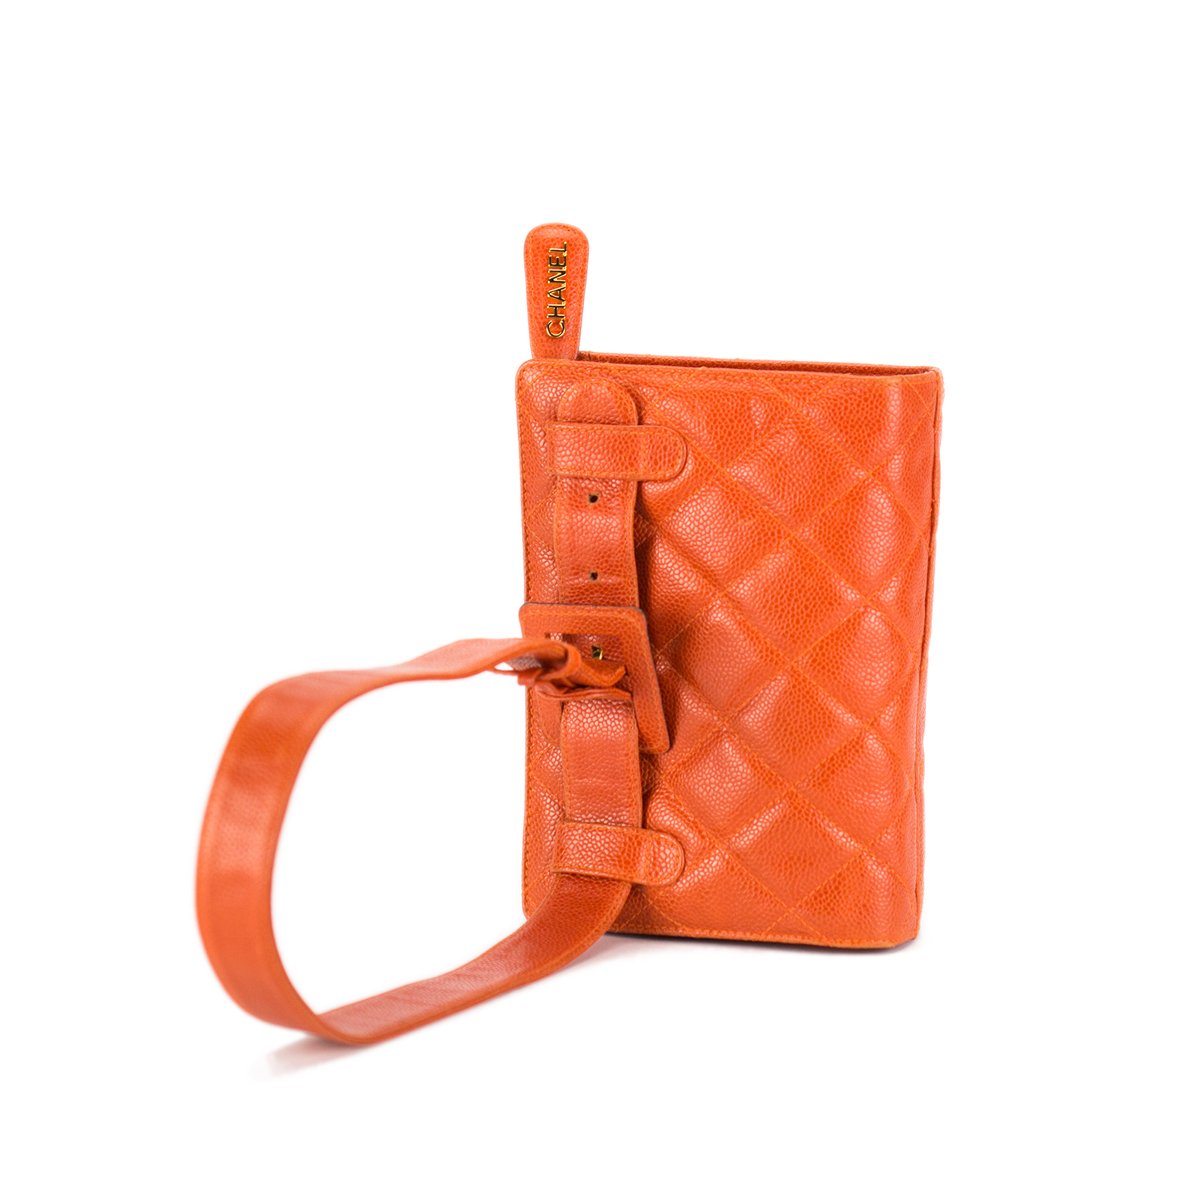 Chanel Orange Caviar Quilted Fanny